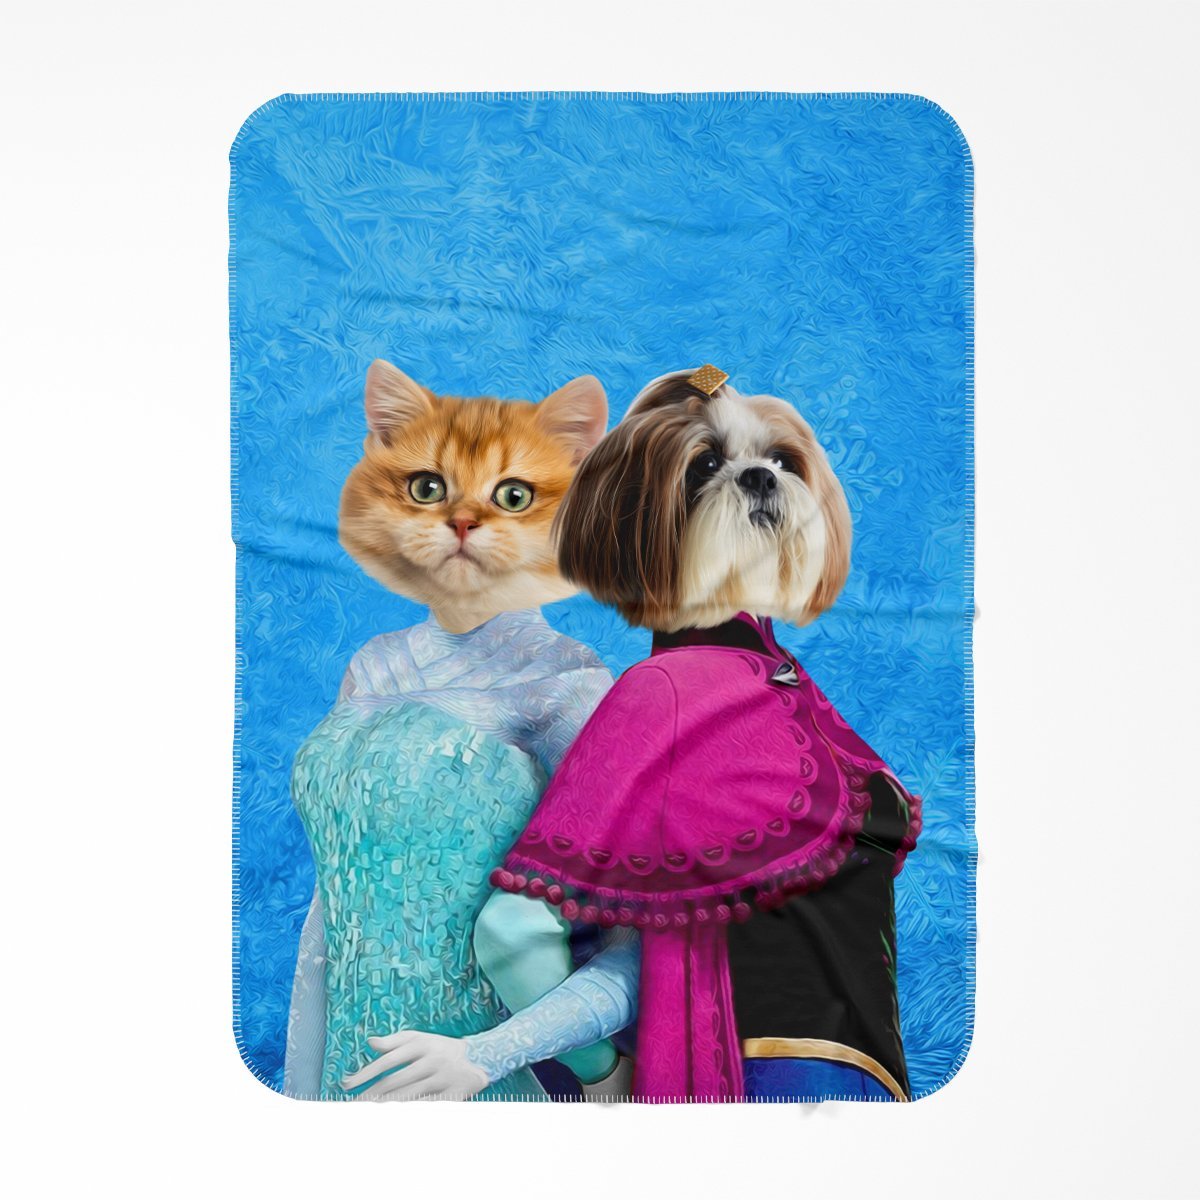 Snow Sisters (Frozen Inspired): Custom Pet Blanket - Paw & Glory - #pet portraits# - #dog portraits# - #pet portraits uk#Paw and glory, Pet portraits blanket,paw blanket, blanket with dog, personalised pet art, dog and cat paintings, custom pet portrait